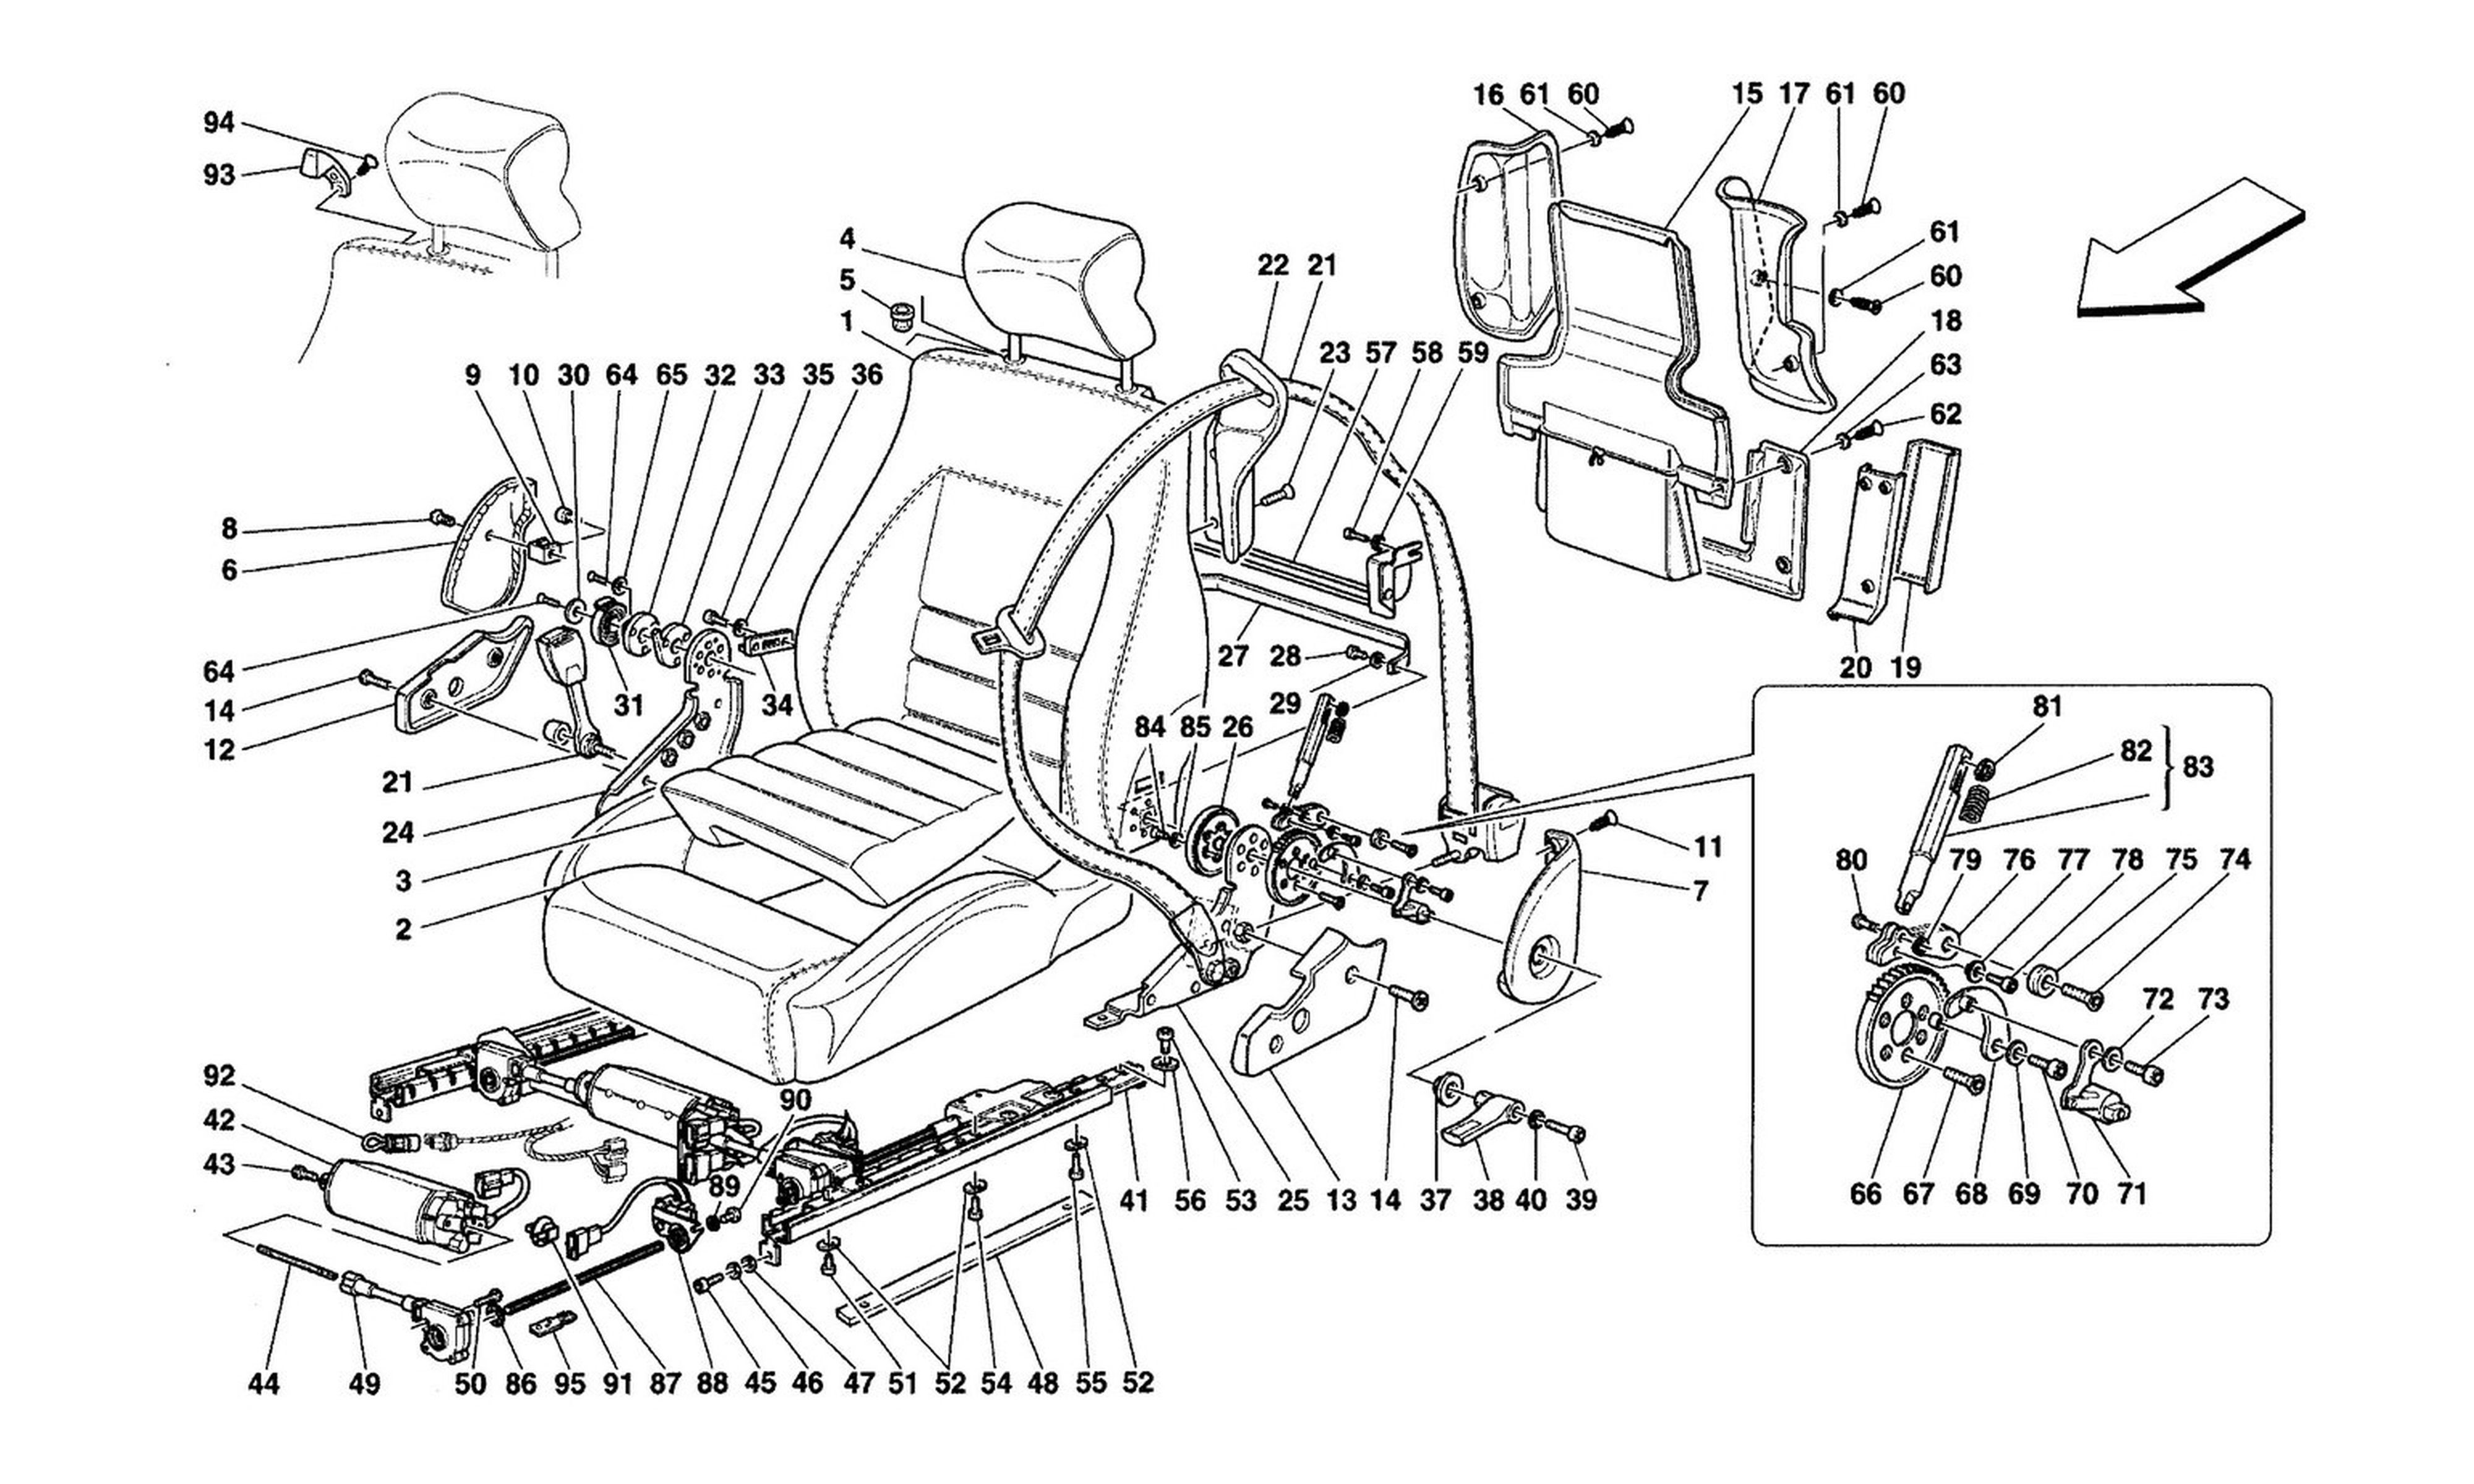 Schematic: Seats And Safety Belts -Valid For Spider-